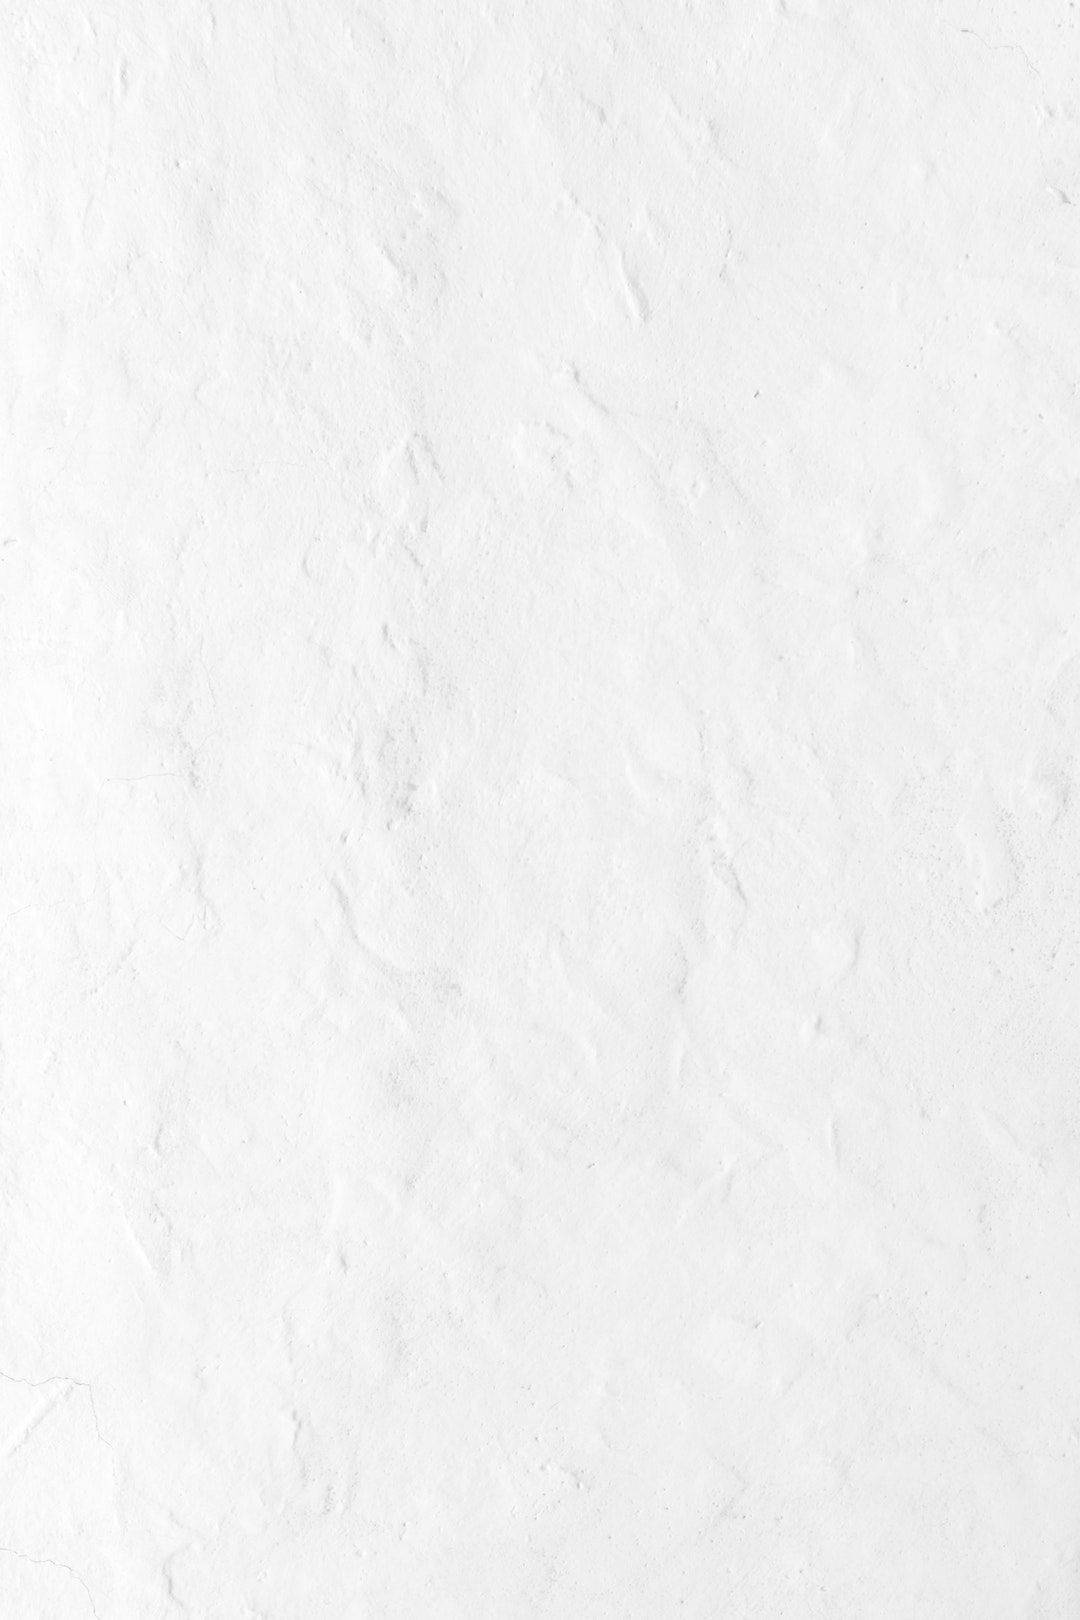 Textured Wall White Screen Phone Background Wallpaper